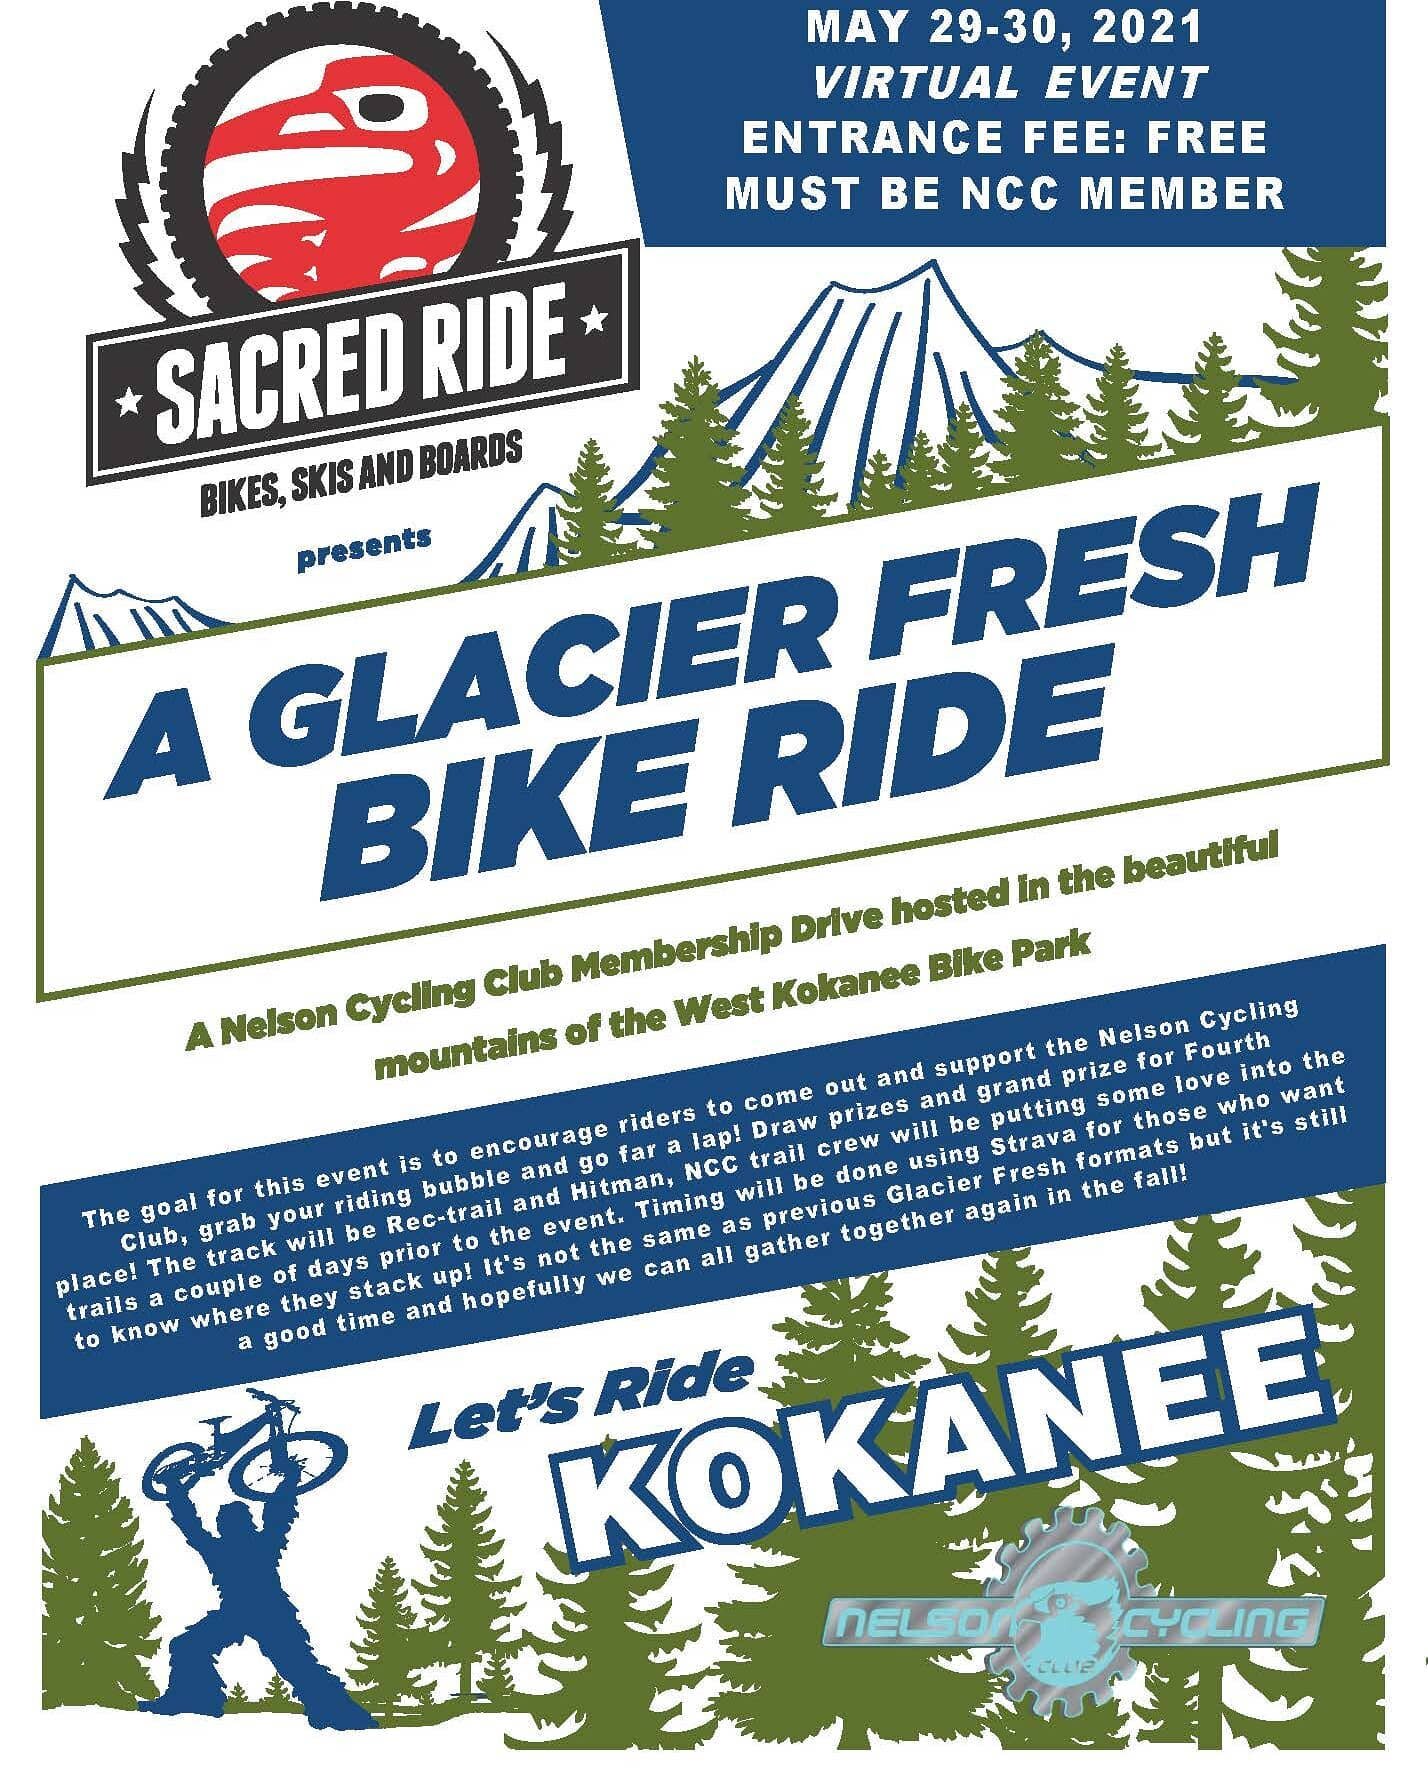 JOIN US (virtually) FOR THE ANNUAL GLACIER FRESH BIKE RIDE!

A Nelson Cycling Club Membership Drive hosted in partnership with @sacredride , in the beautiful mountains of the West Kokanee Bike Park

📆When: Saturday May 29th + Sunday May 30th, 2021
?